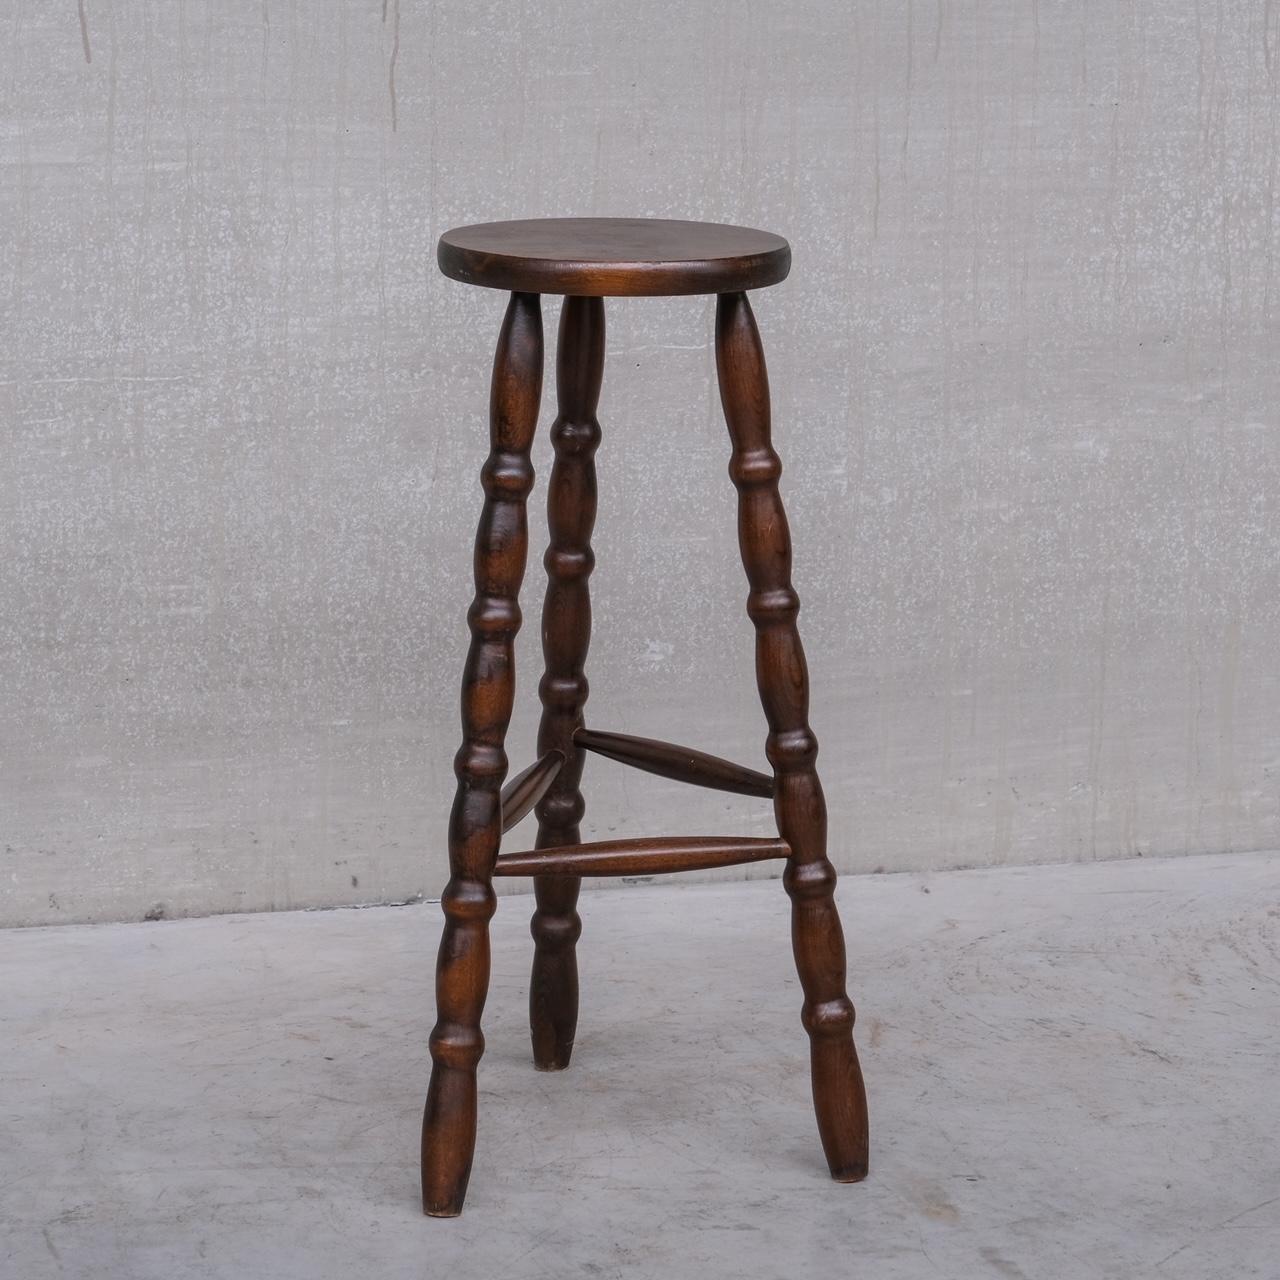 French mid-century selettes. 

Ideal as sculpture stands or artist displays. Or as tall side tables. 

France, c1950s. 

Priced and sold individually. 

Some scuffs and wear commensurate with age. 

Location: Belgium Gallery.